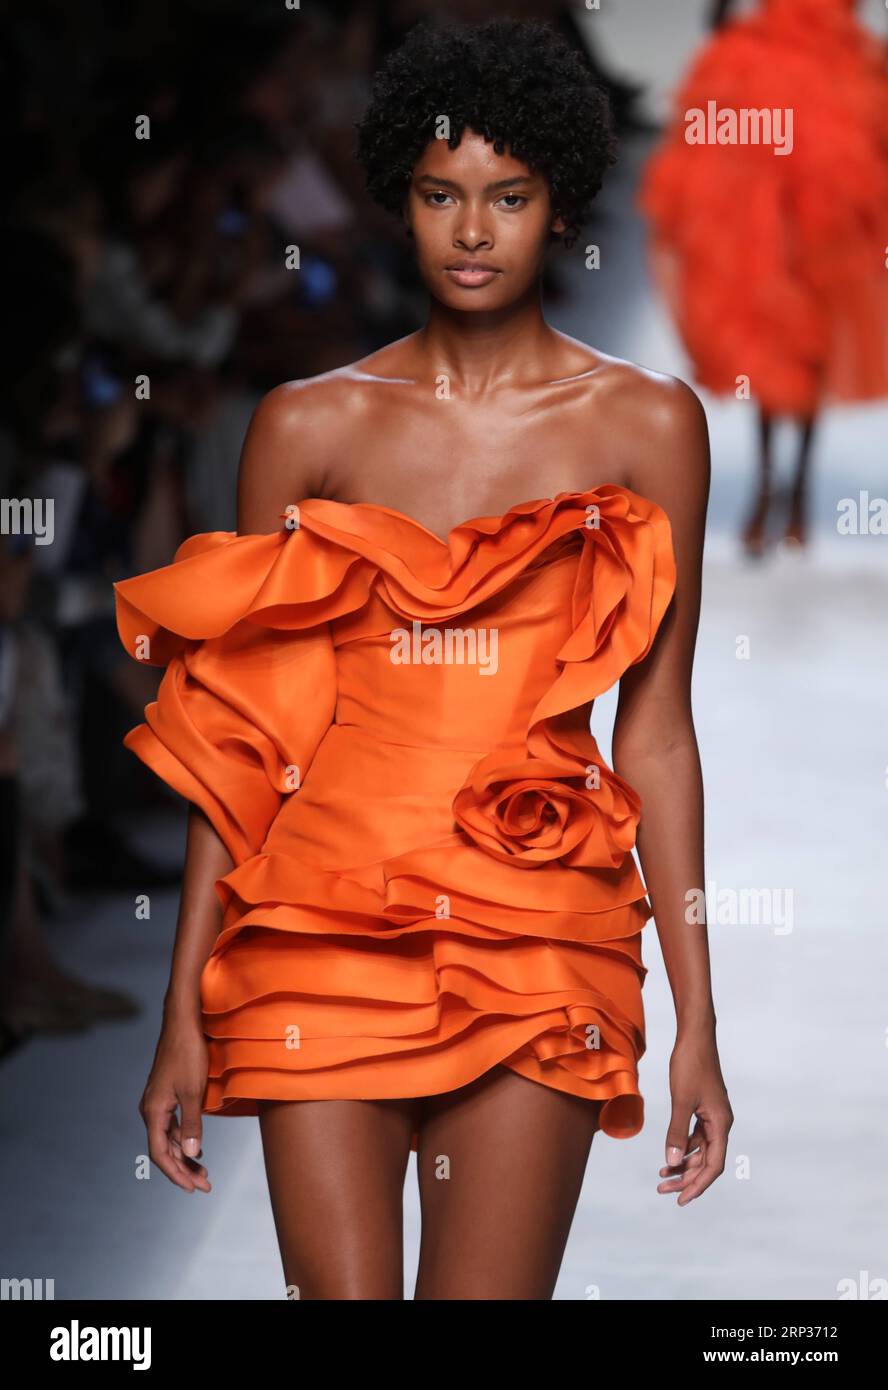 (180922) -- MILAN, Sept. 22, 2018 () -- A model presents a creation of ...